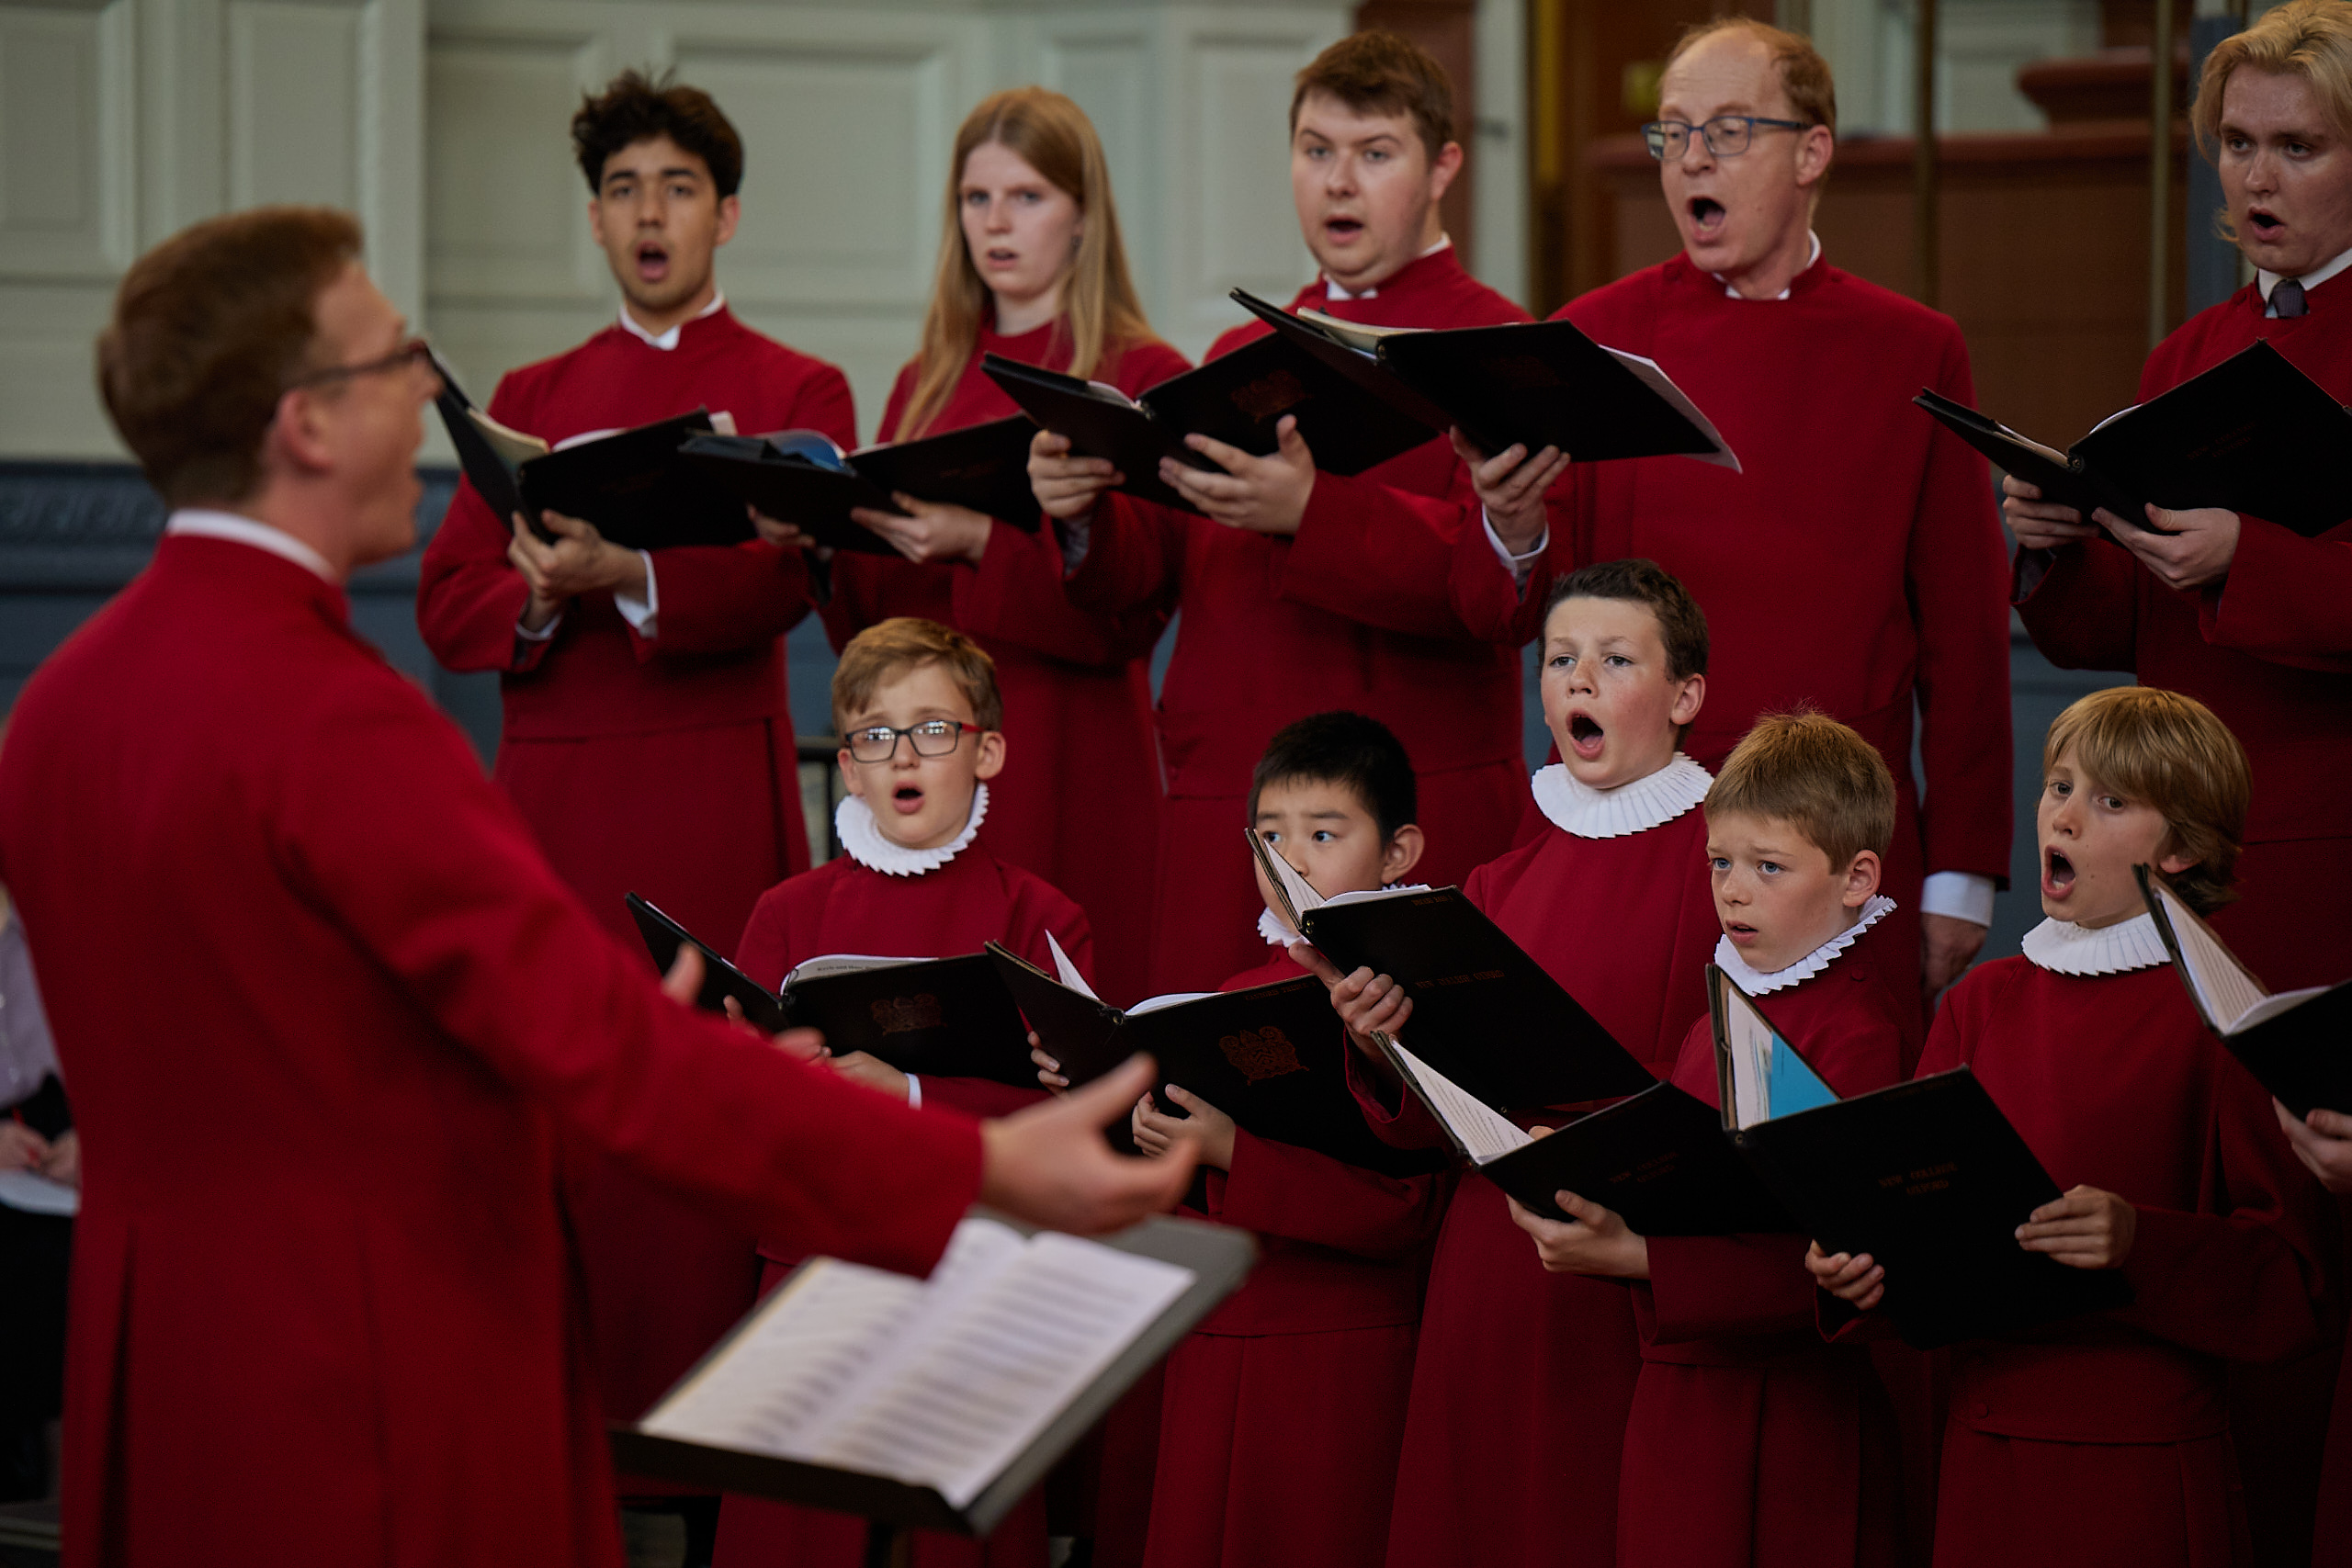 A choir singing dressed in red, with conductor in the foreground